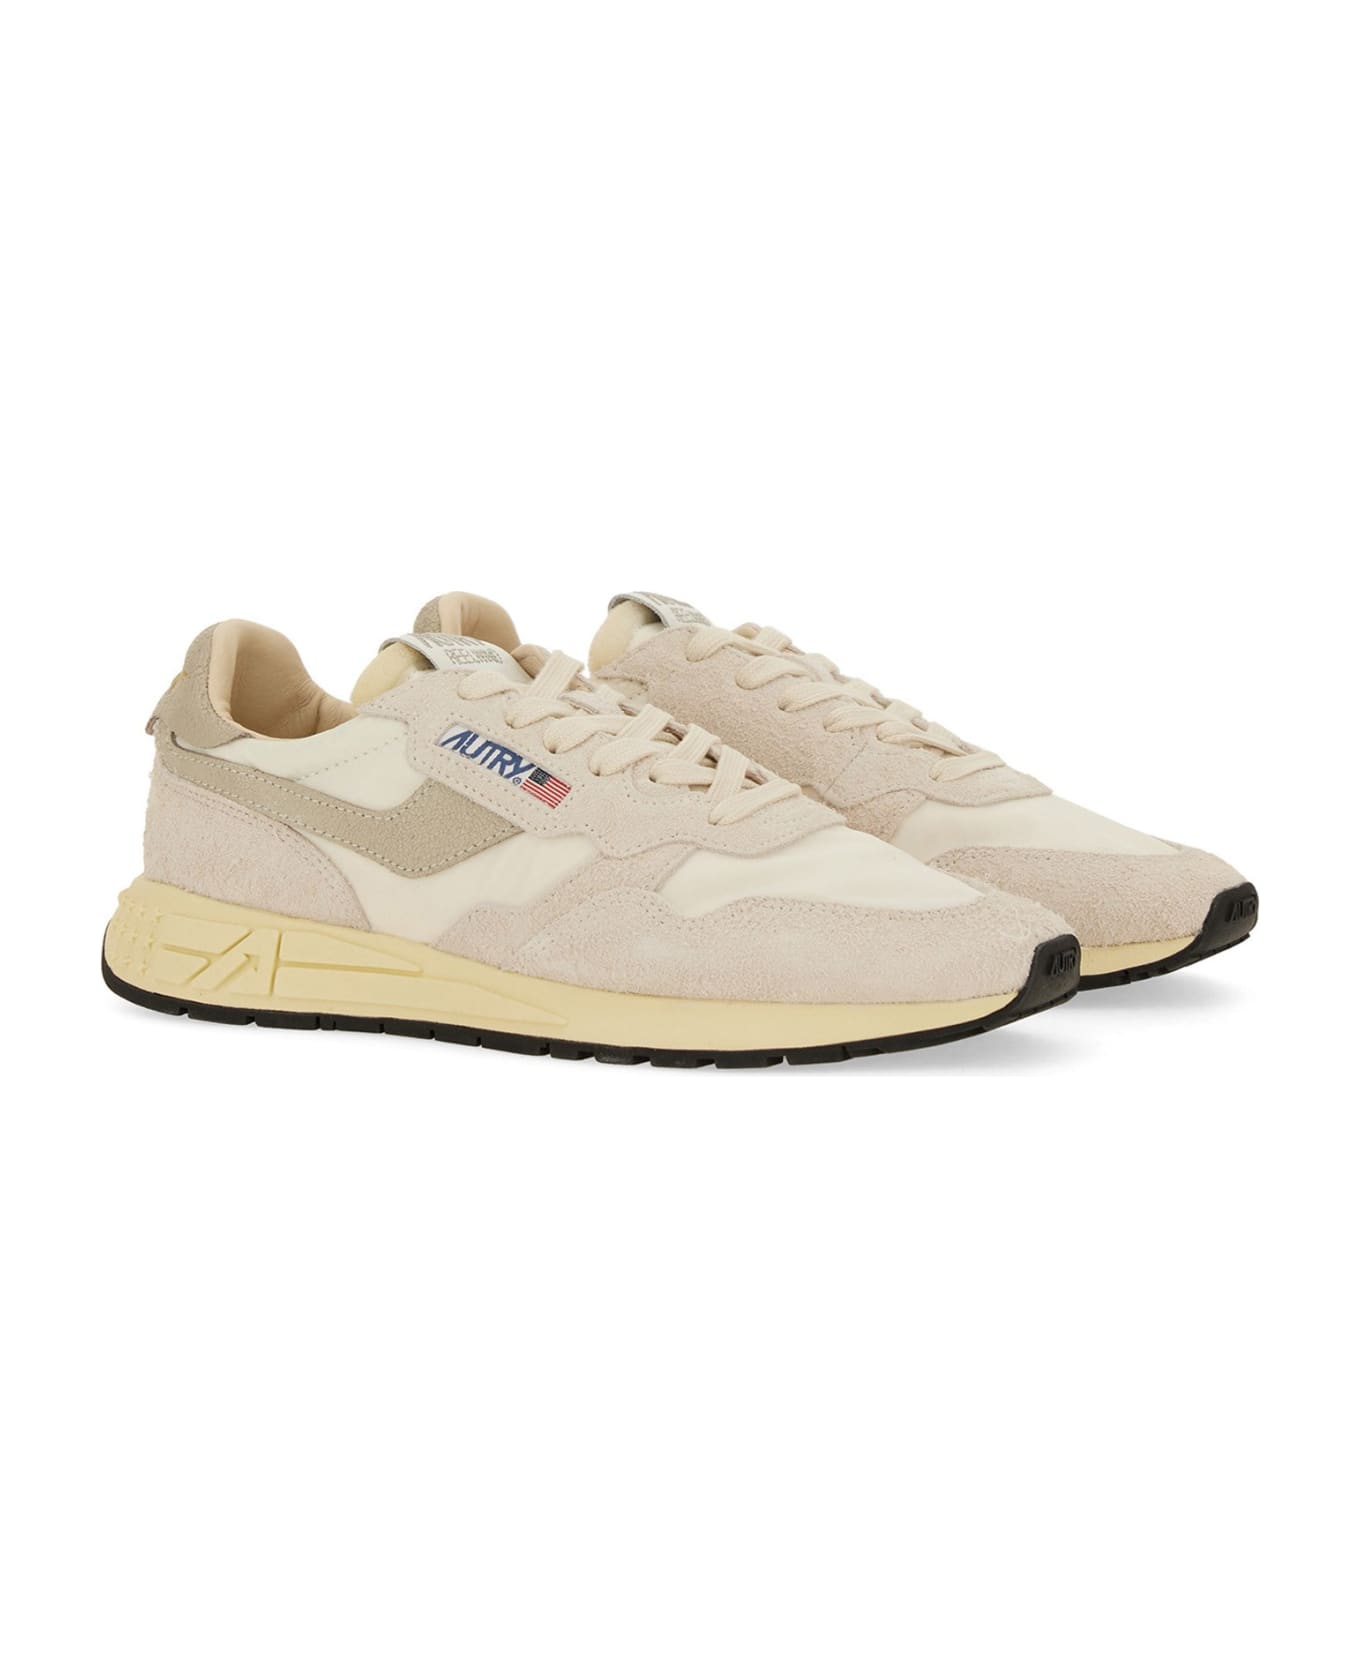 Autry Reelwind - Suede And Technical Textile Trainer - White スニーカー